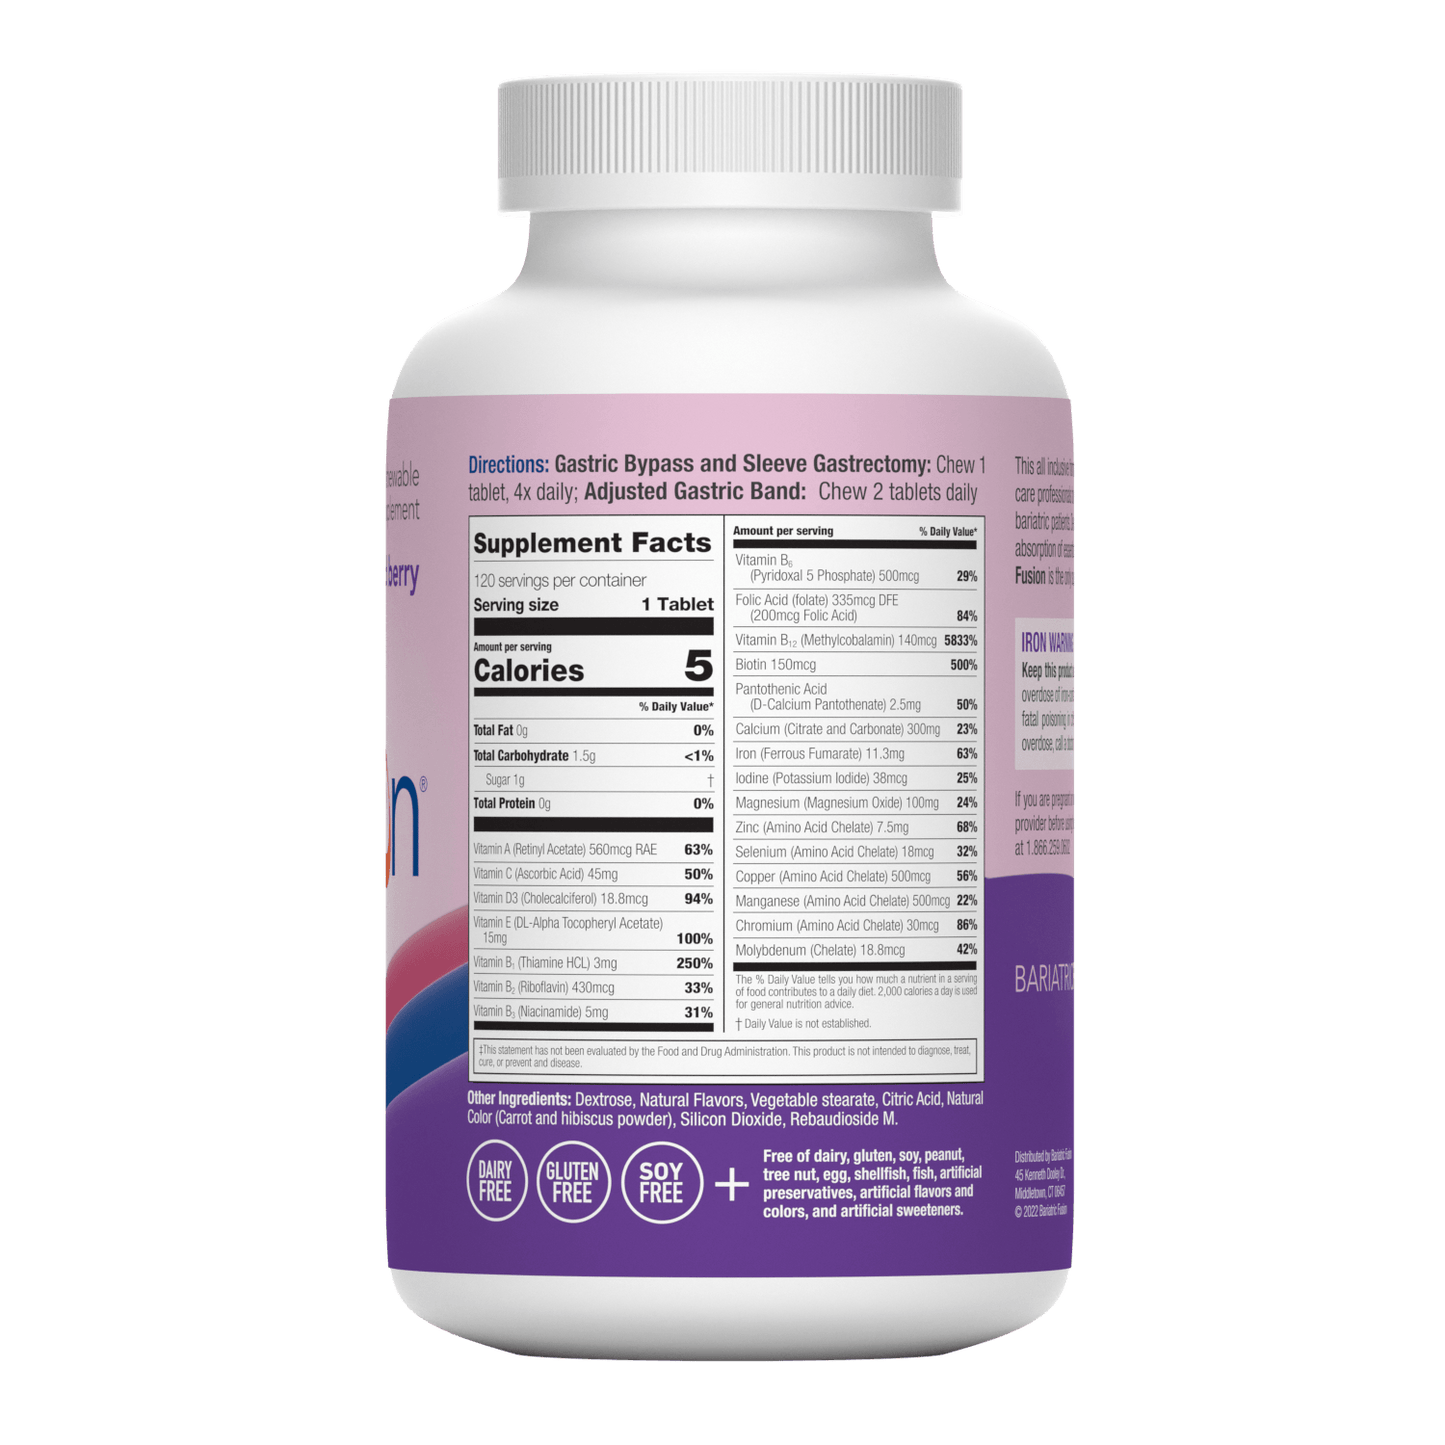 Mixed Berry Complete Chewable Bariatric Multivitamin - Bariatric Fusion